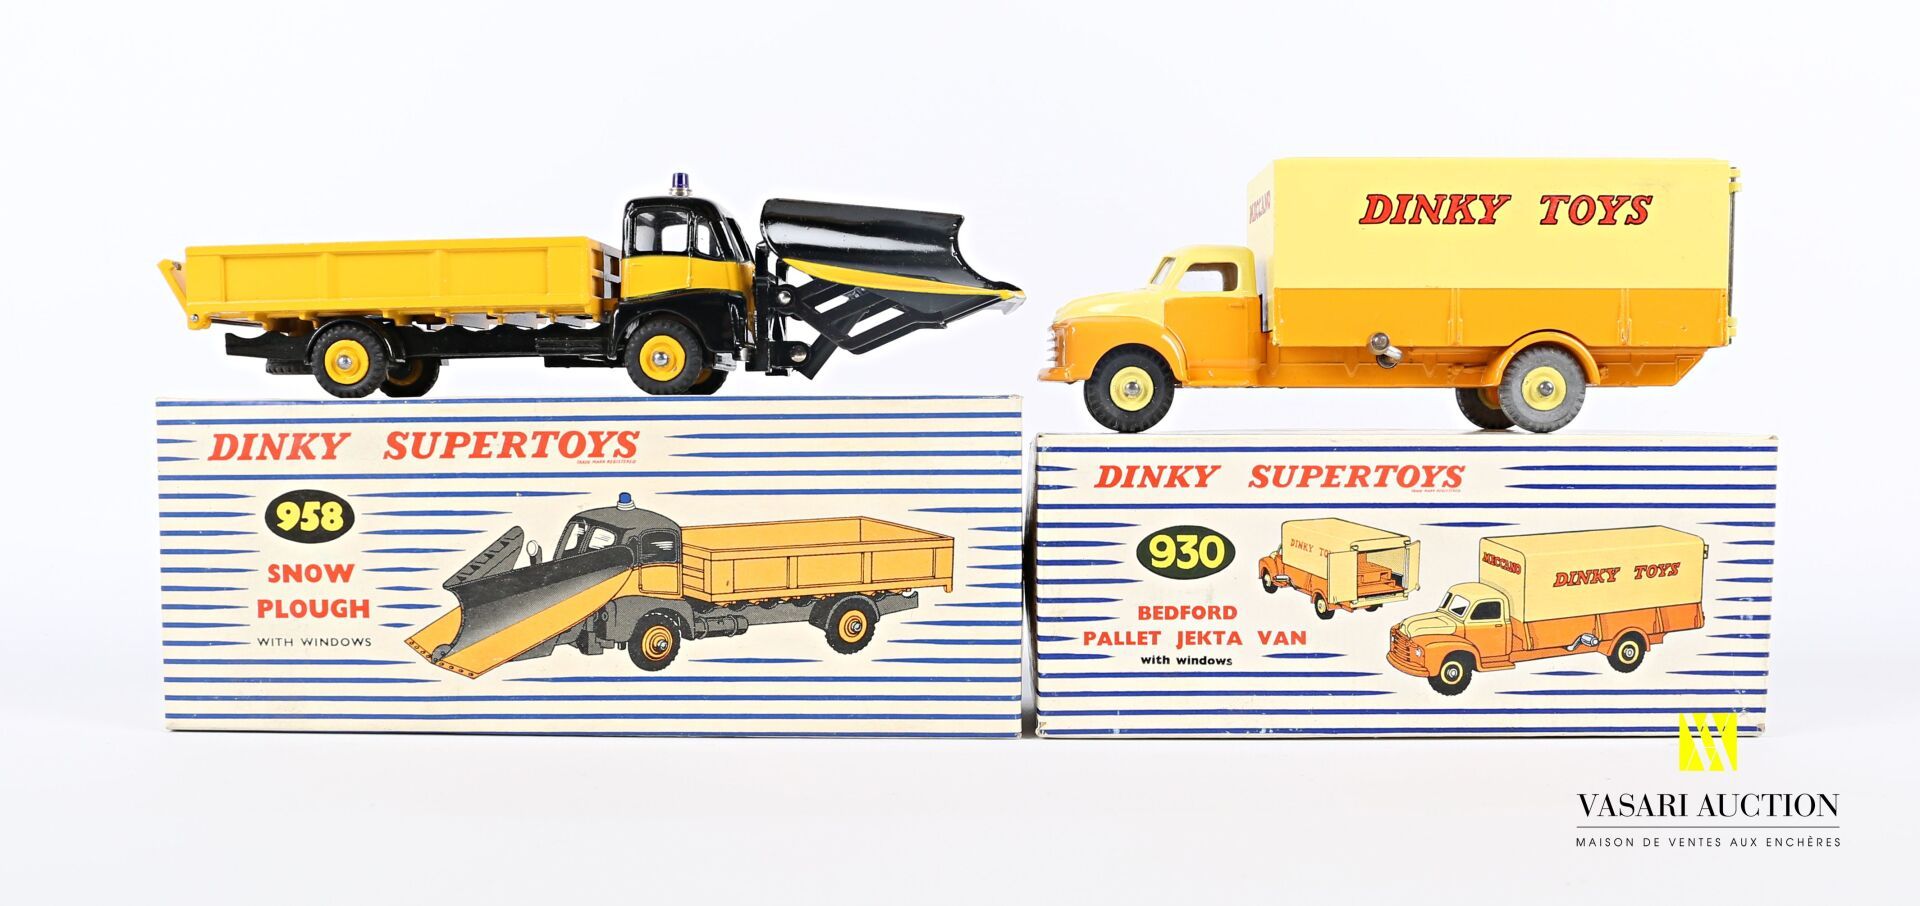 Null DINKY SUPERTOYS (GB MECCANO)

Chasse-neige 958

Camion Bedford "Dinky Toys"&hellip;